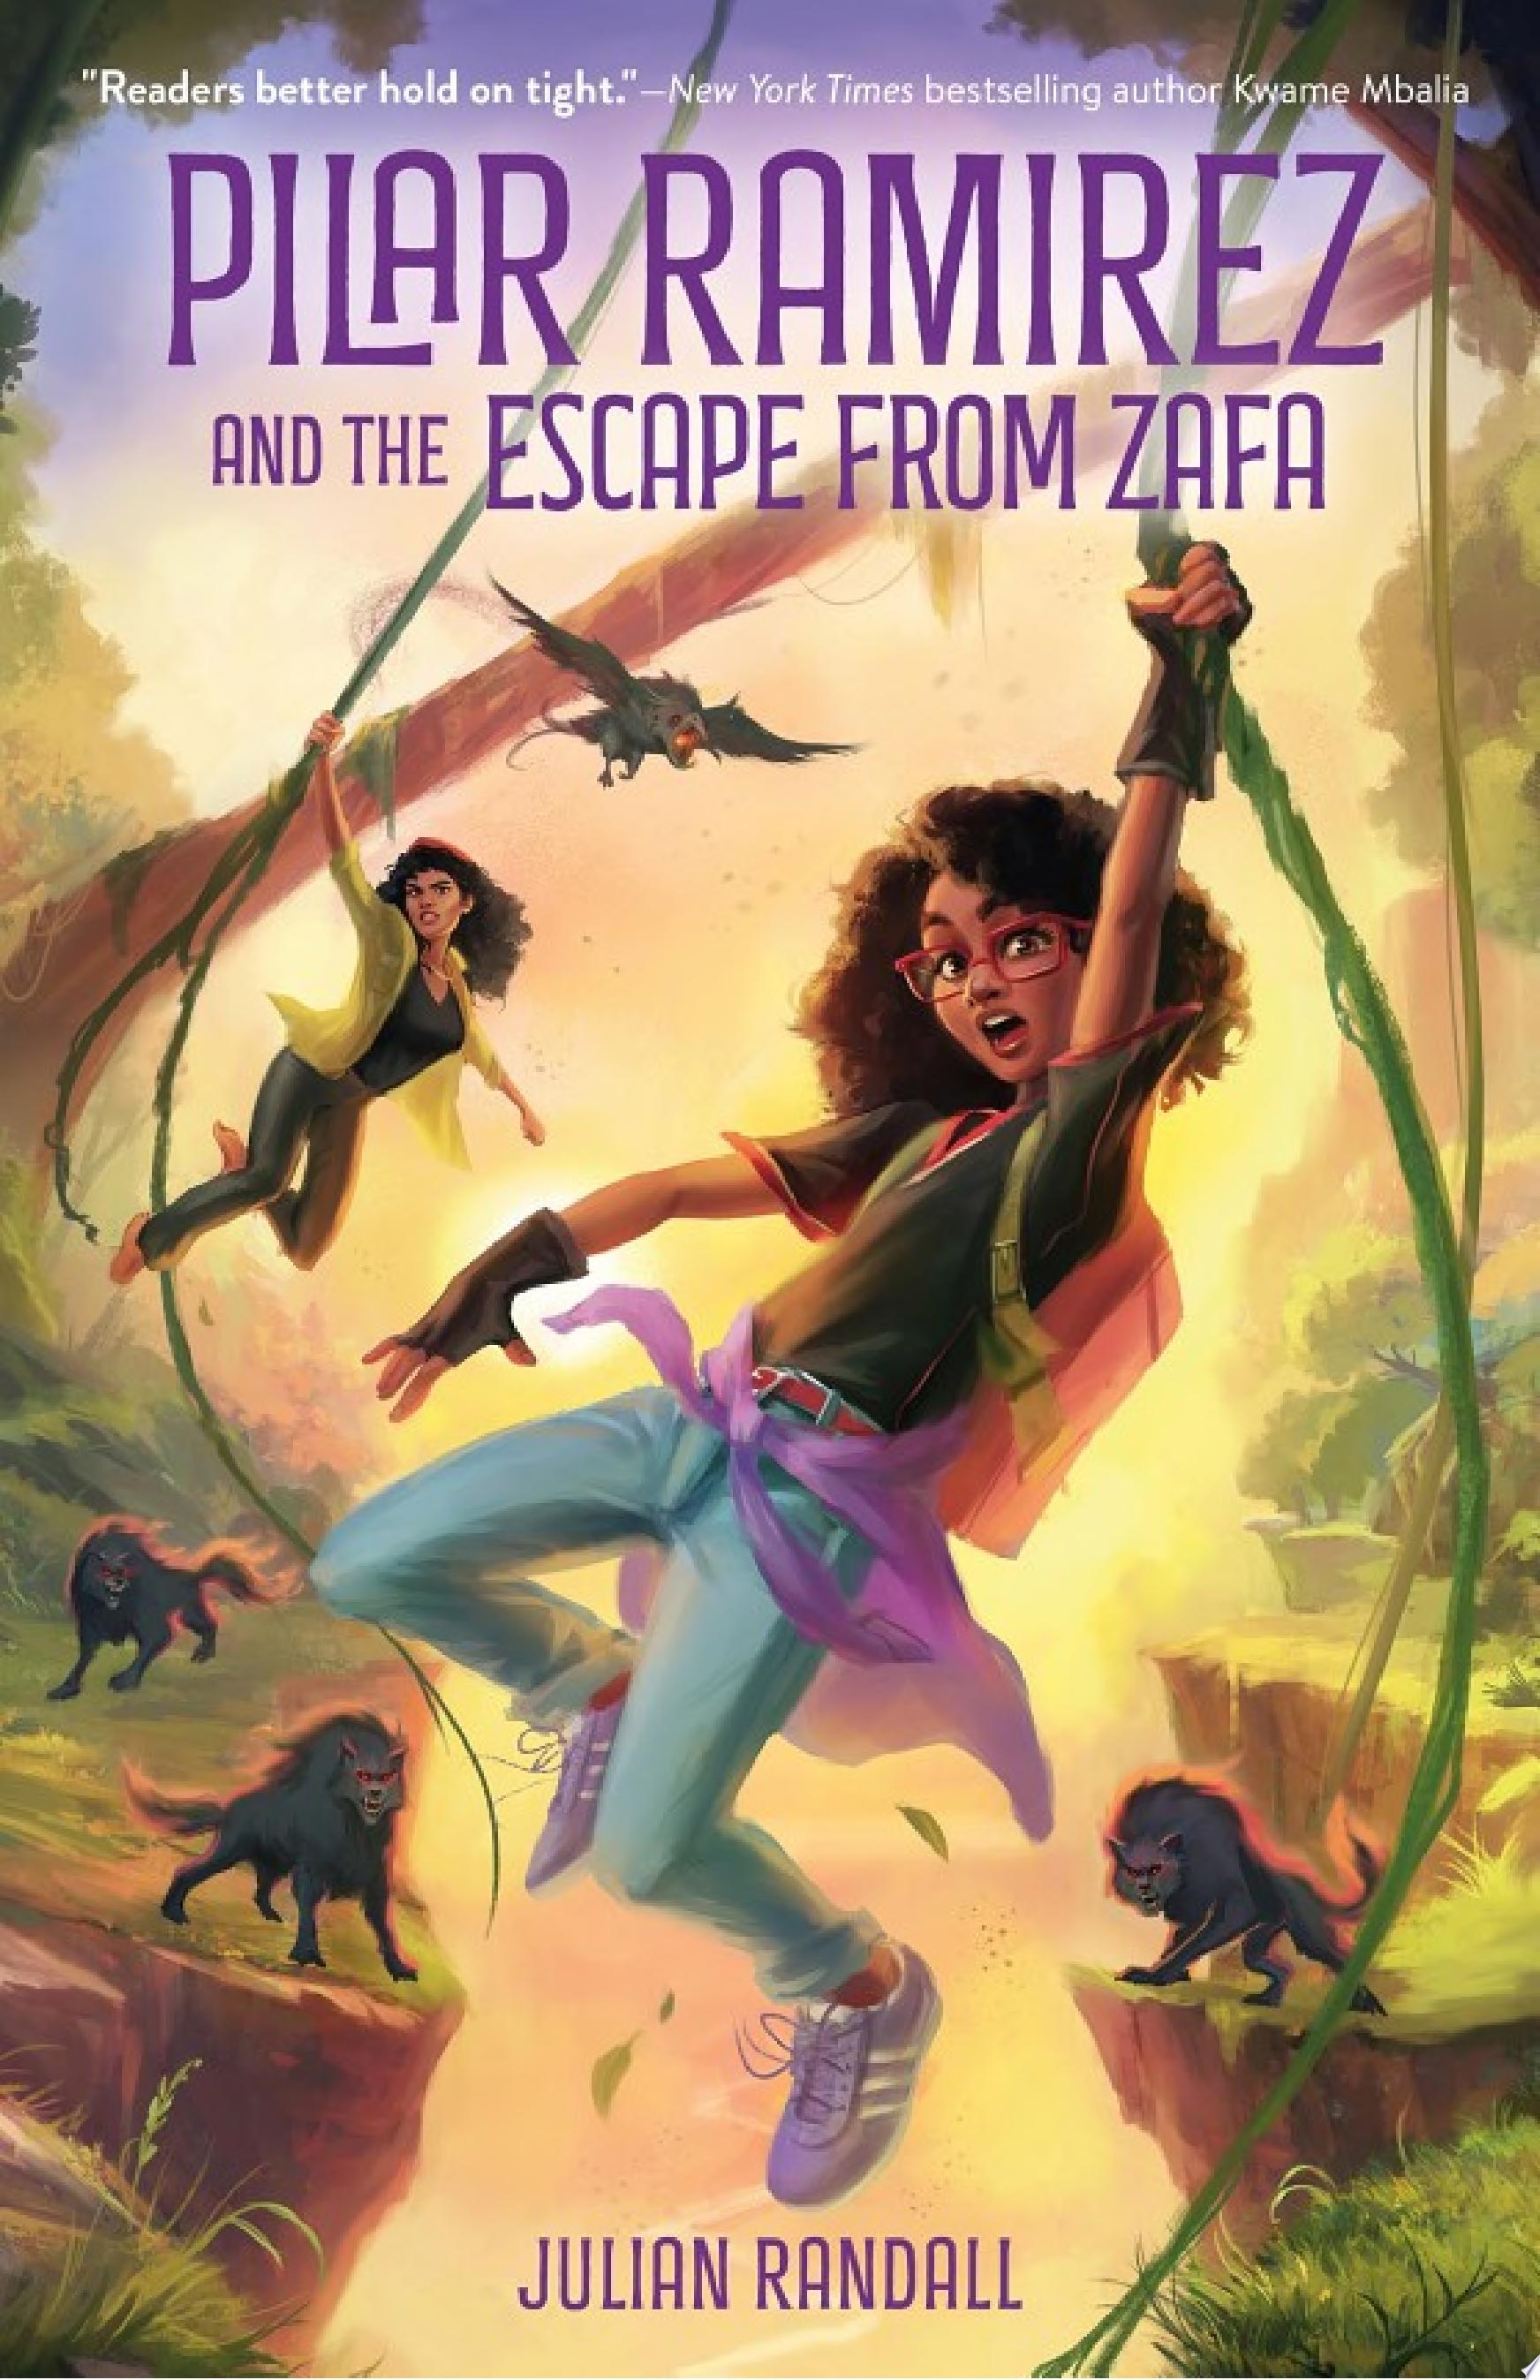 Image for "Pilar Ramirez and the Escape from Zafa"